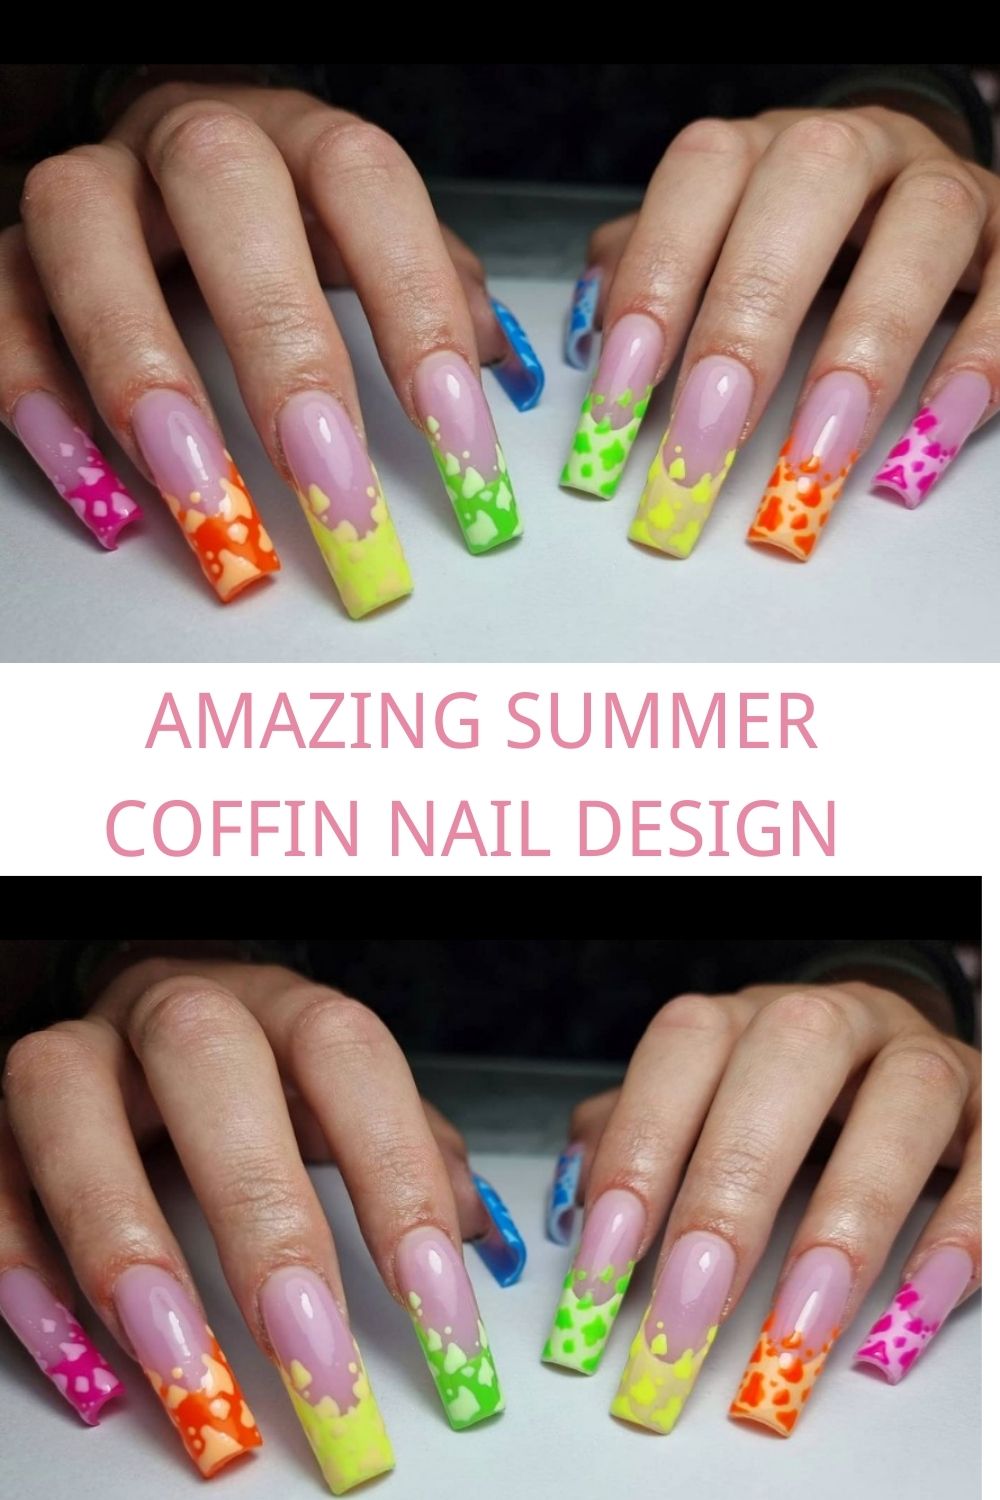 Awesome Summer Coffin Nails You'll Want To Try 2021! - Page 5 of 5